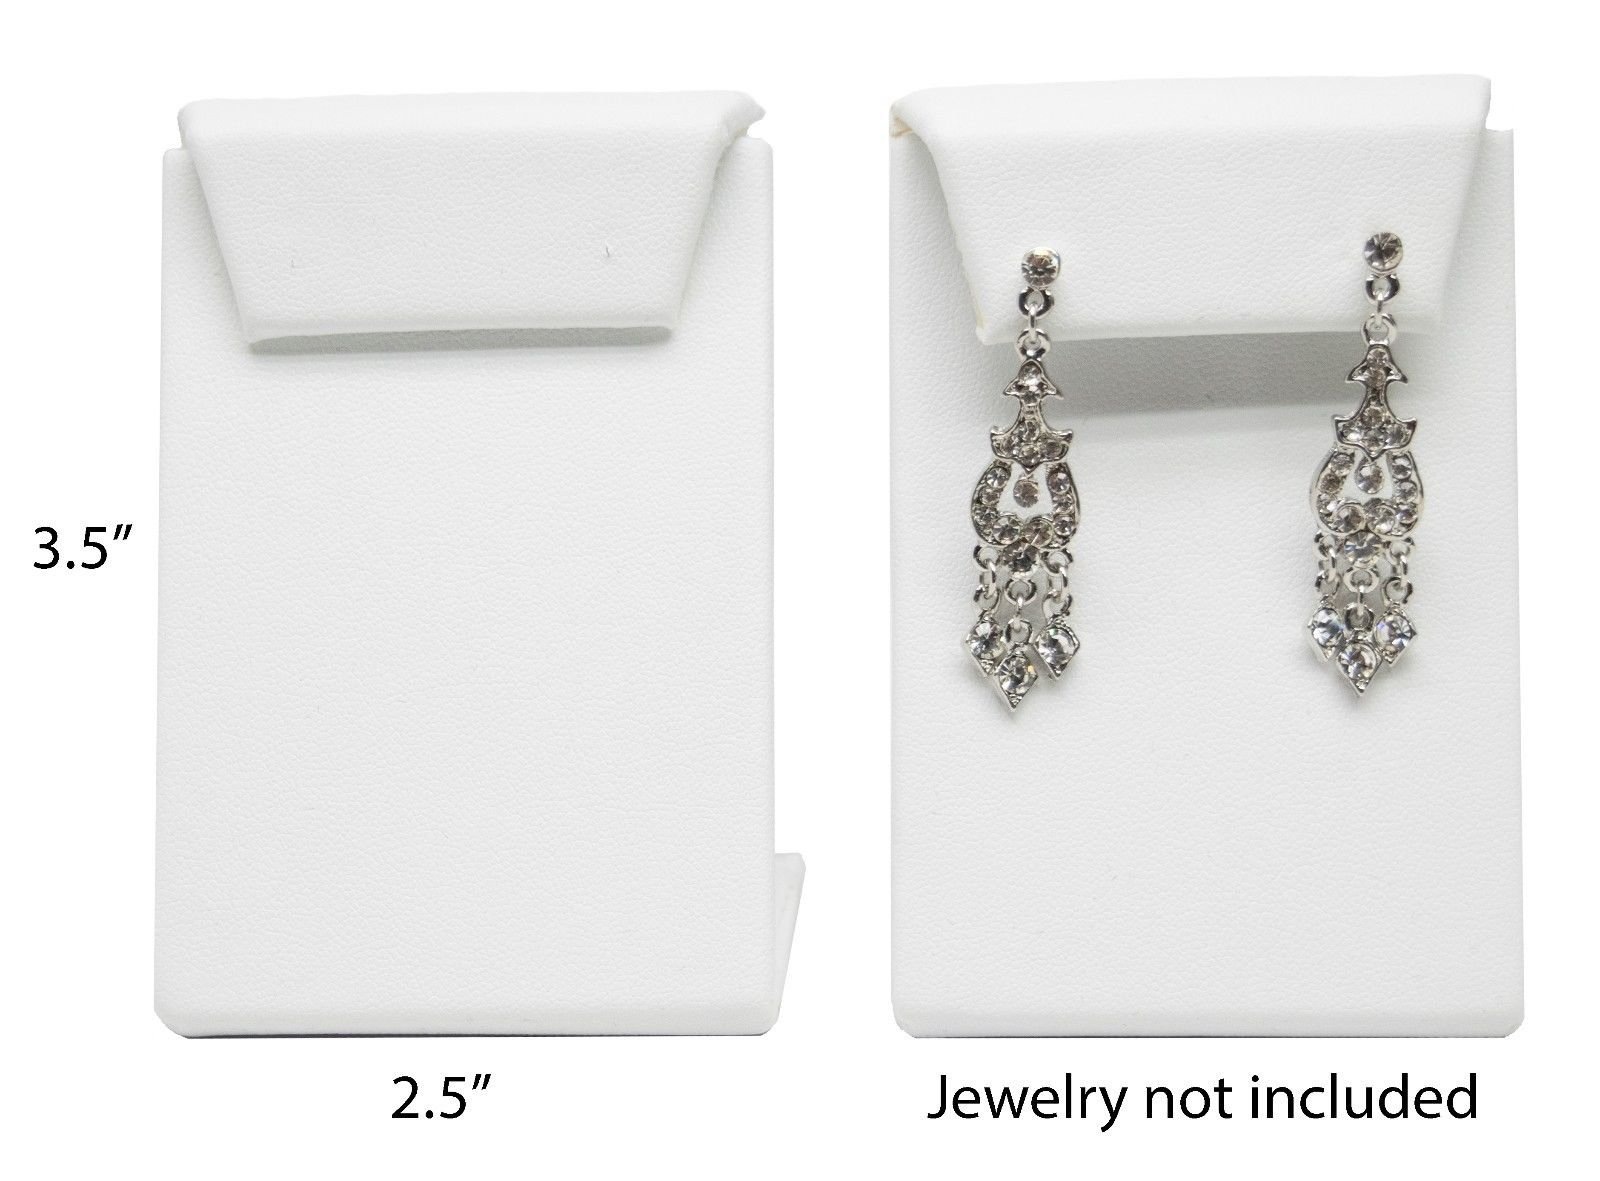 Novel Box™ Leaning Drop ENovel Box™ Leaning Drop Earring Jewelry Display Stand 3.5X2.5" In White Leatherette